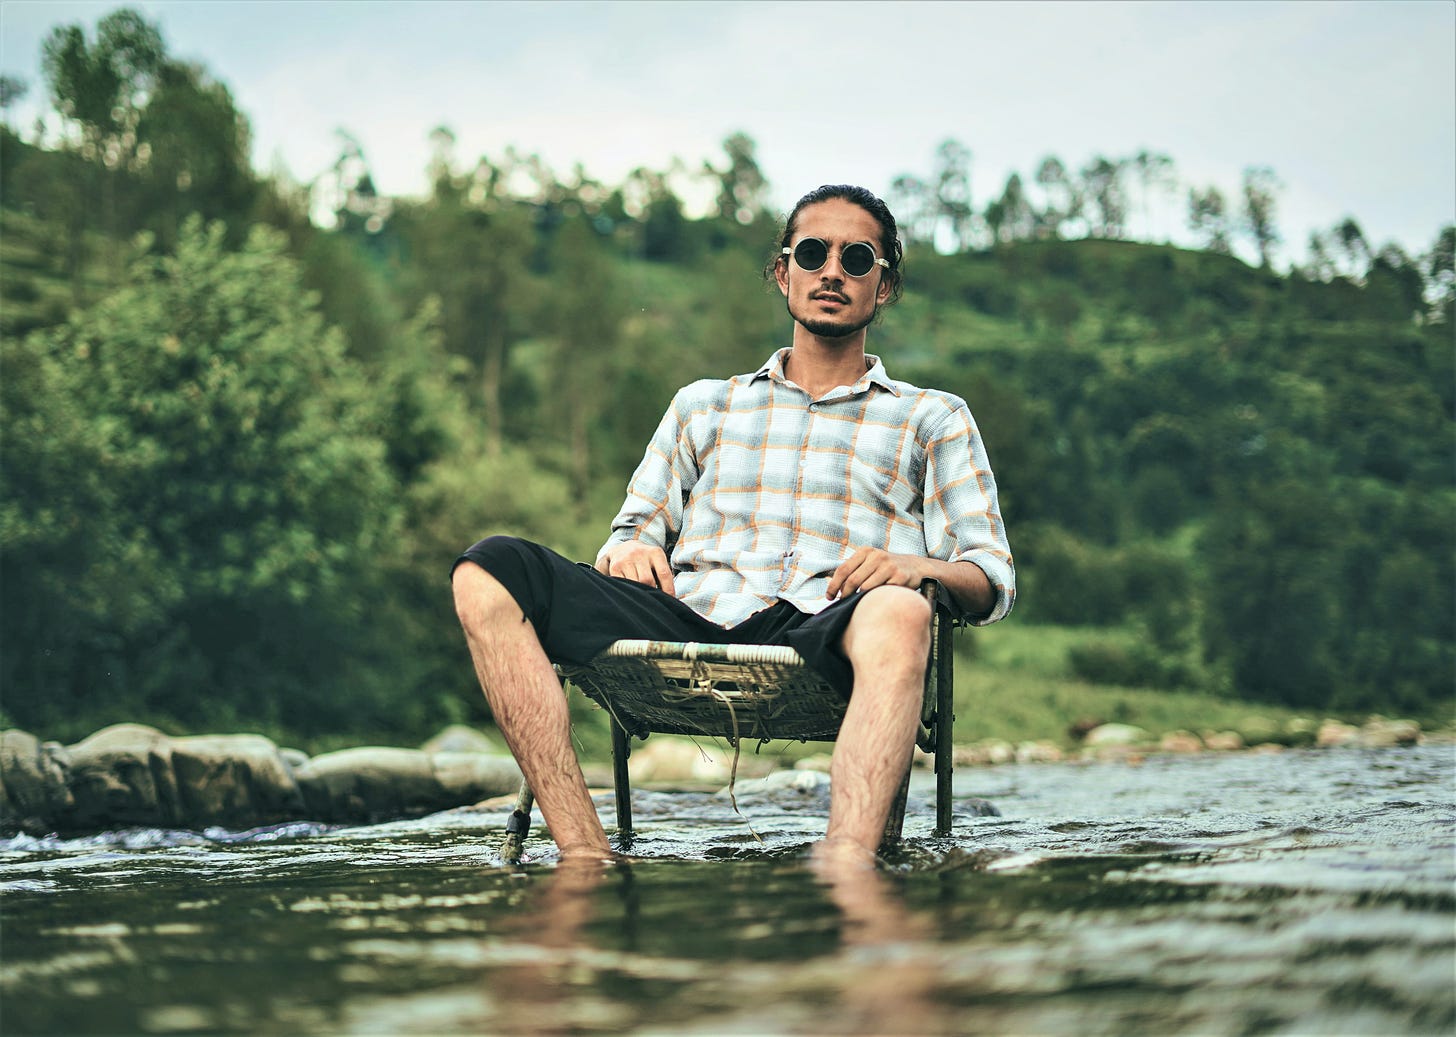 man wearing sunglasses and plaid shirt sitting in lawn chair in middle of a river